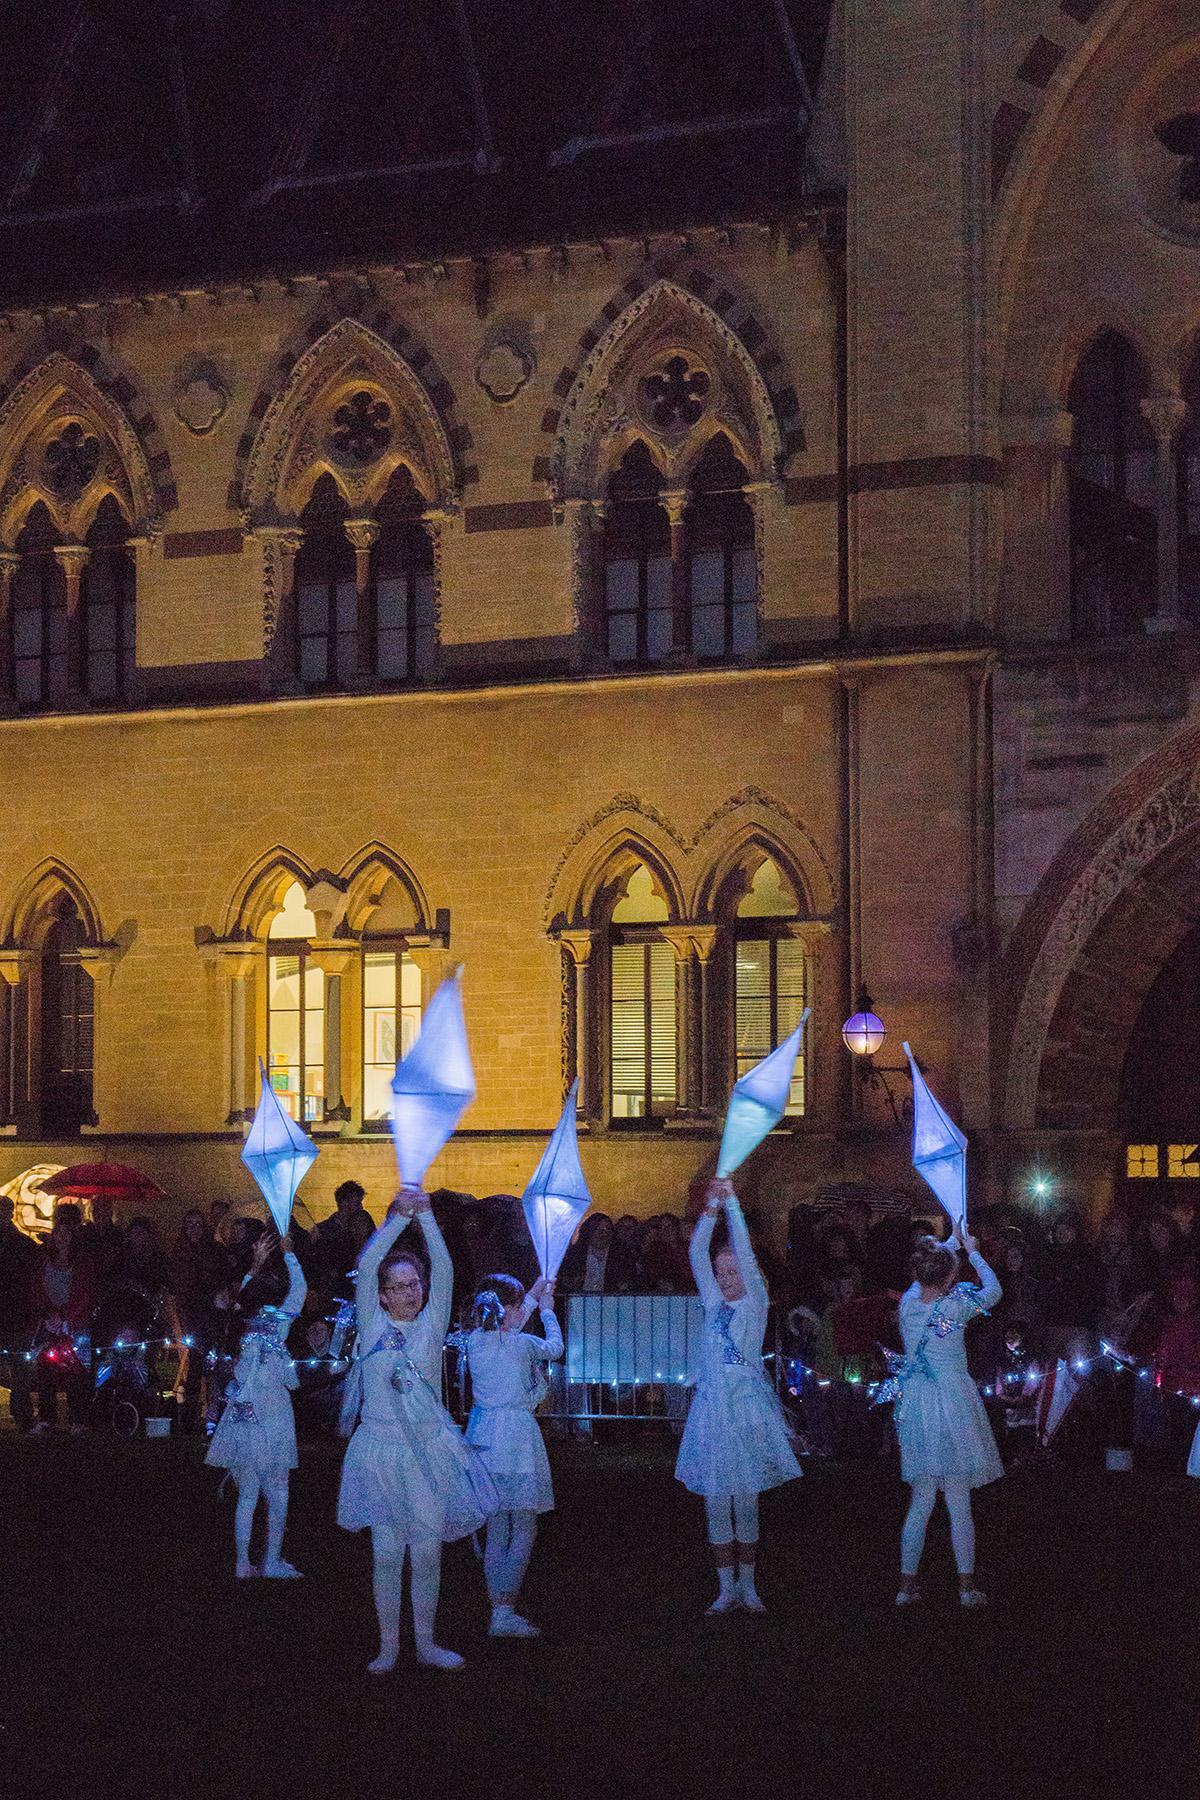 Events took place around Oxford this weekend to celebrate the Christmas Light Festival